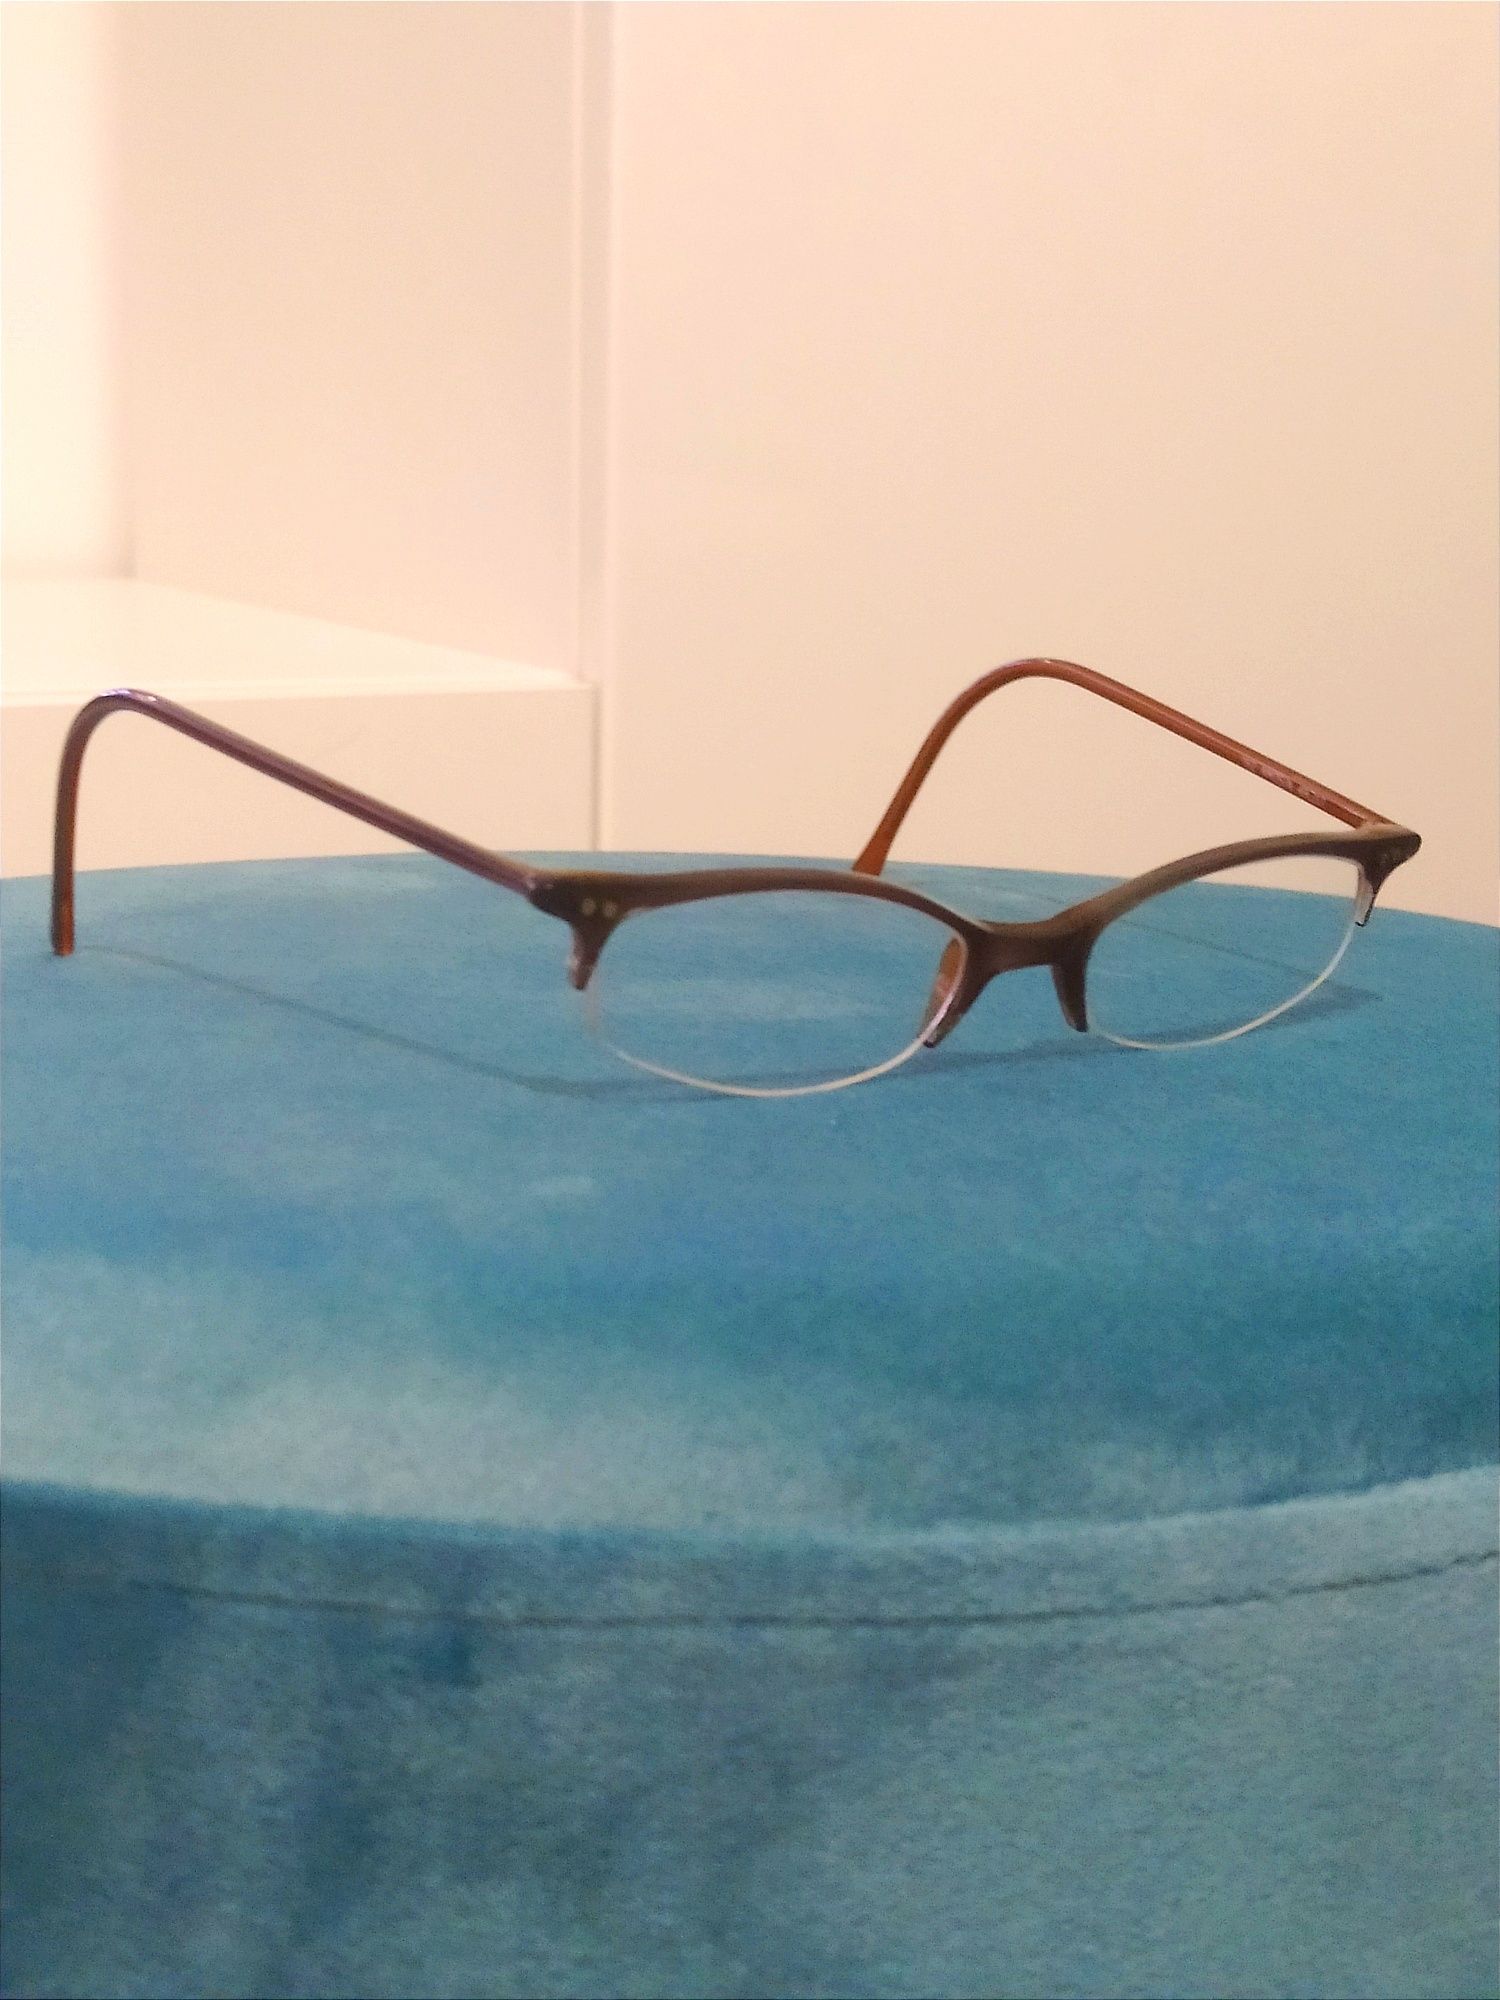 NOUVELLE VAGUE Vintage Glasses Made in Italy